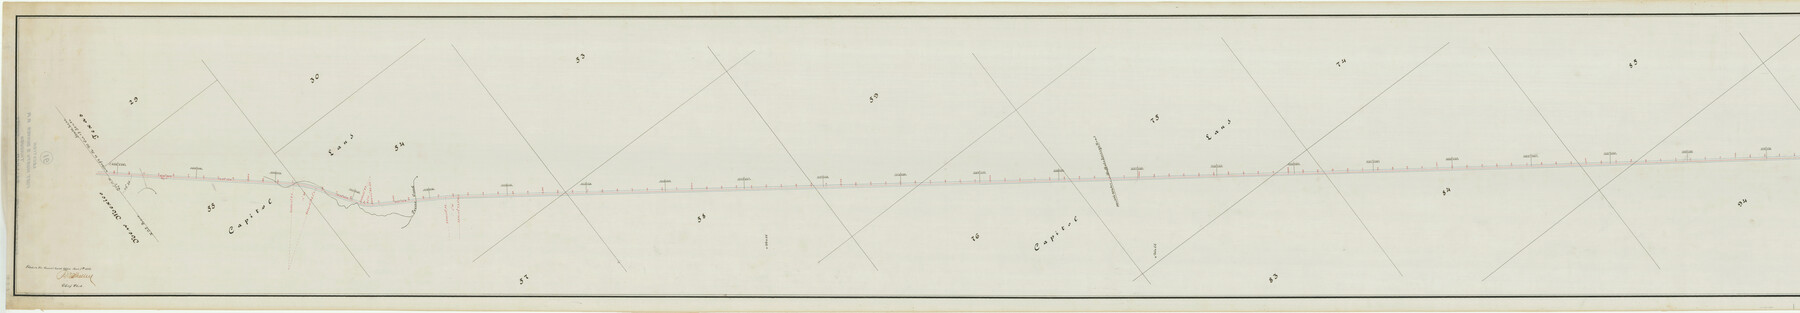 64351, [Map of the Fort Worth & Denver City Ry., Dallam County, Texas], General Map Collection